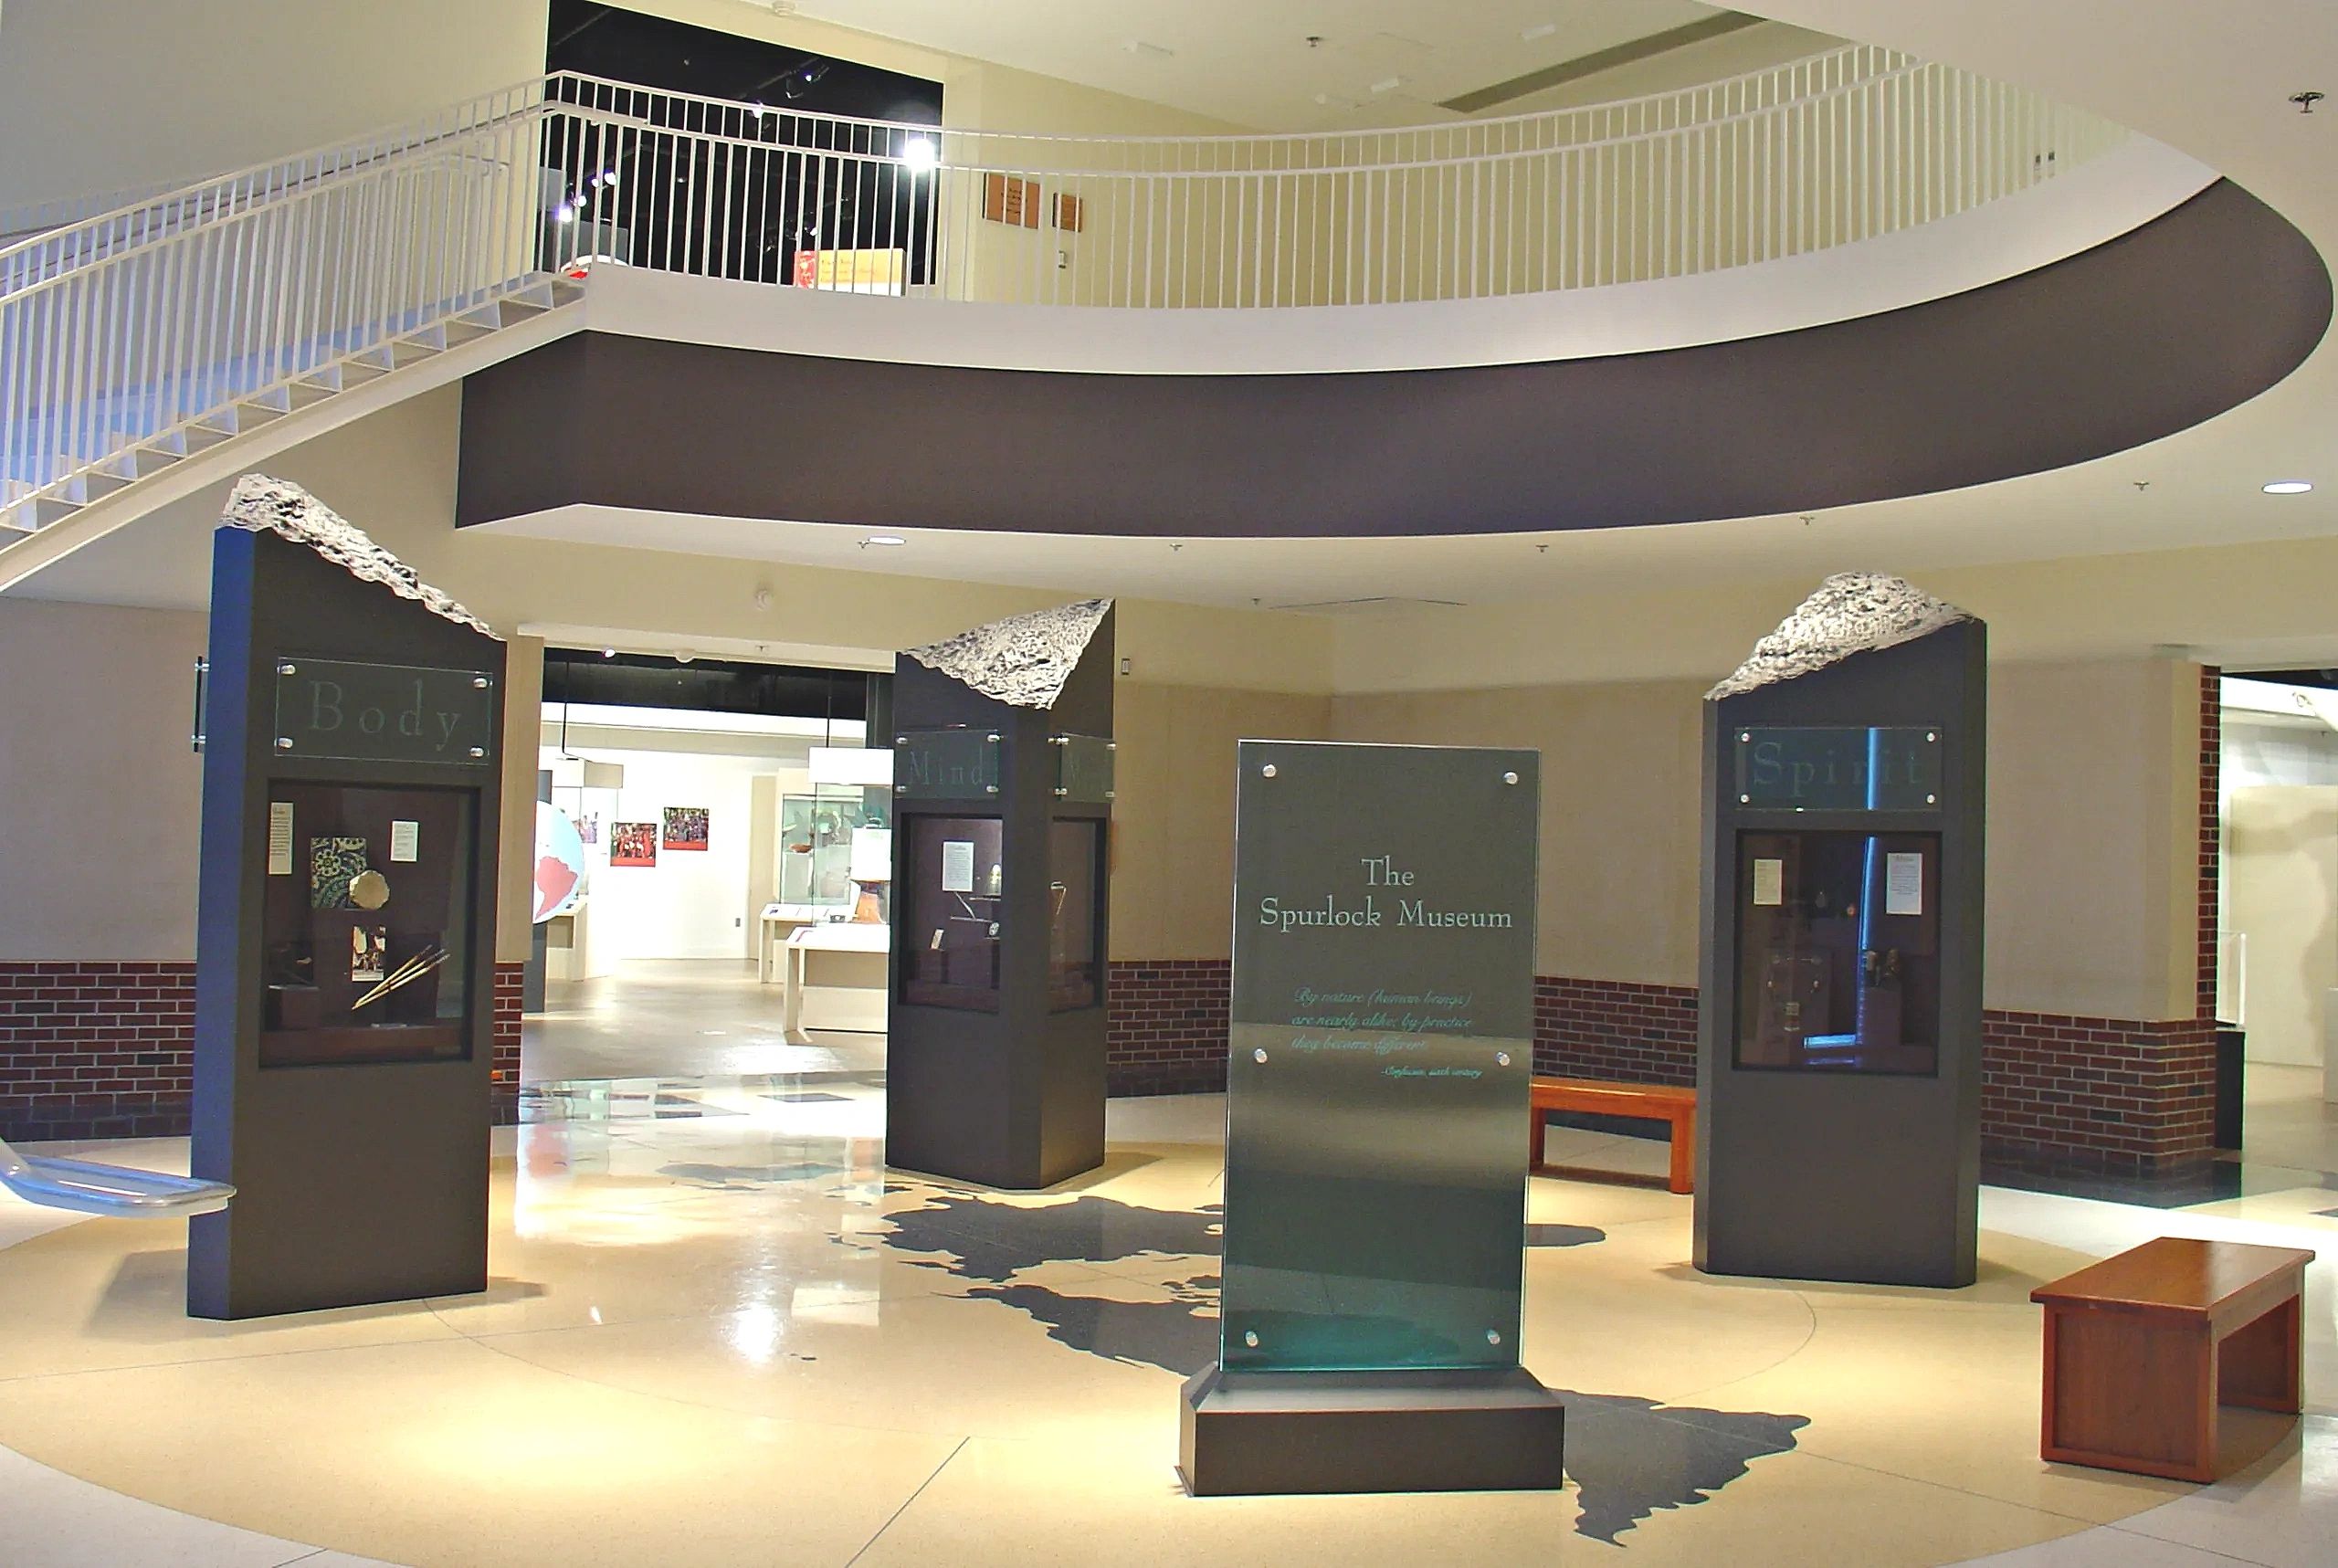 Spurlock Museum of World Culture, Illinois
Lobby structures with custom fabricated "broken column" a